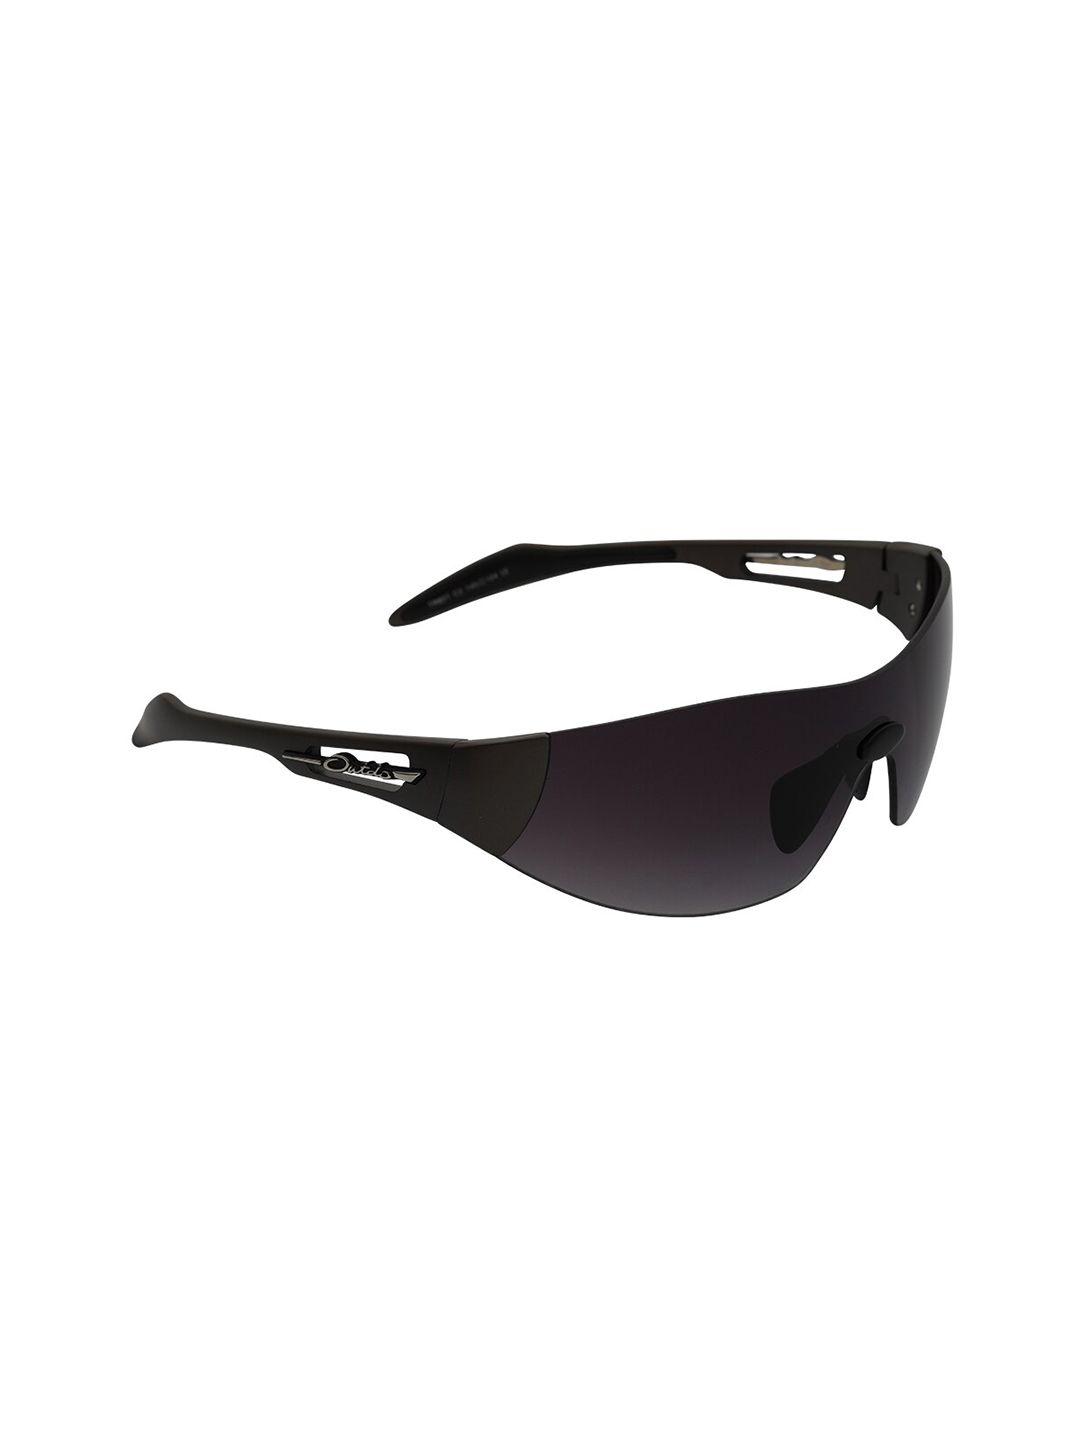 charles london men grey lens & black sports sunglasses with uv protected lens tr827 c2 s